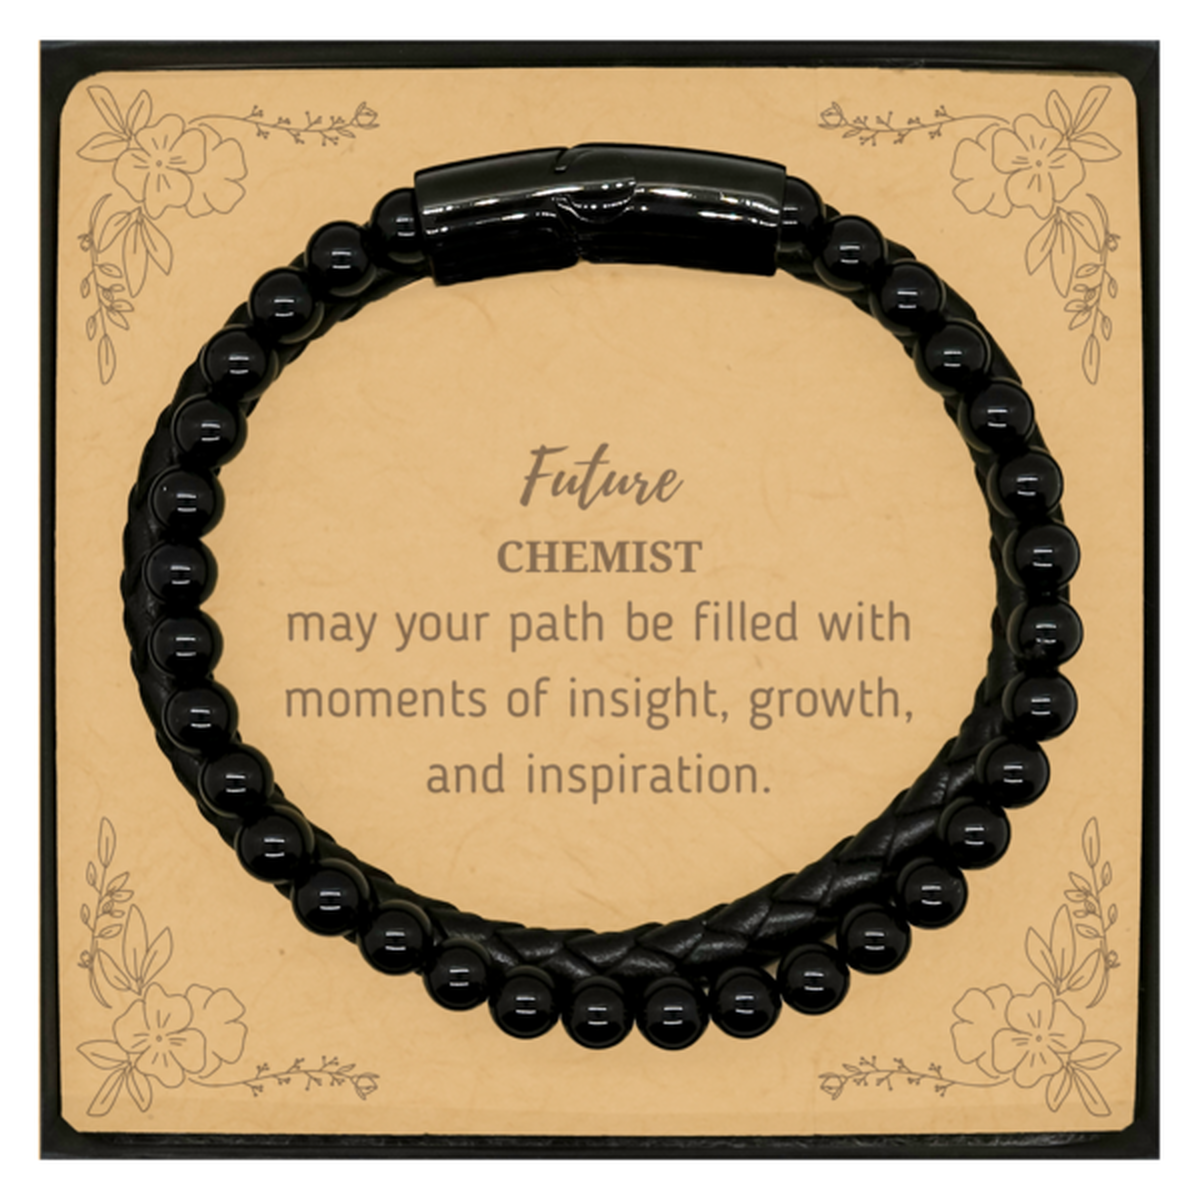 Future Chemist Gifts, May your path be filled with moments of insight, Graduation Gifts for New Chemist, Christmas Unique Stone Leather Bracelets For Men, Women, Friends